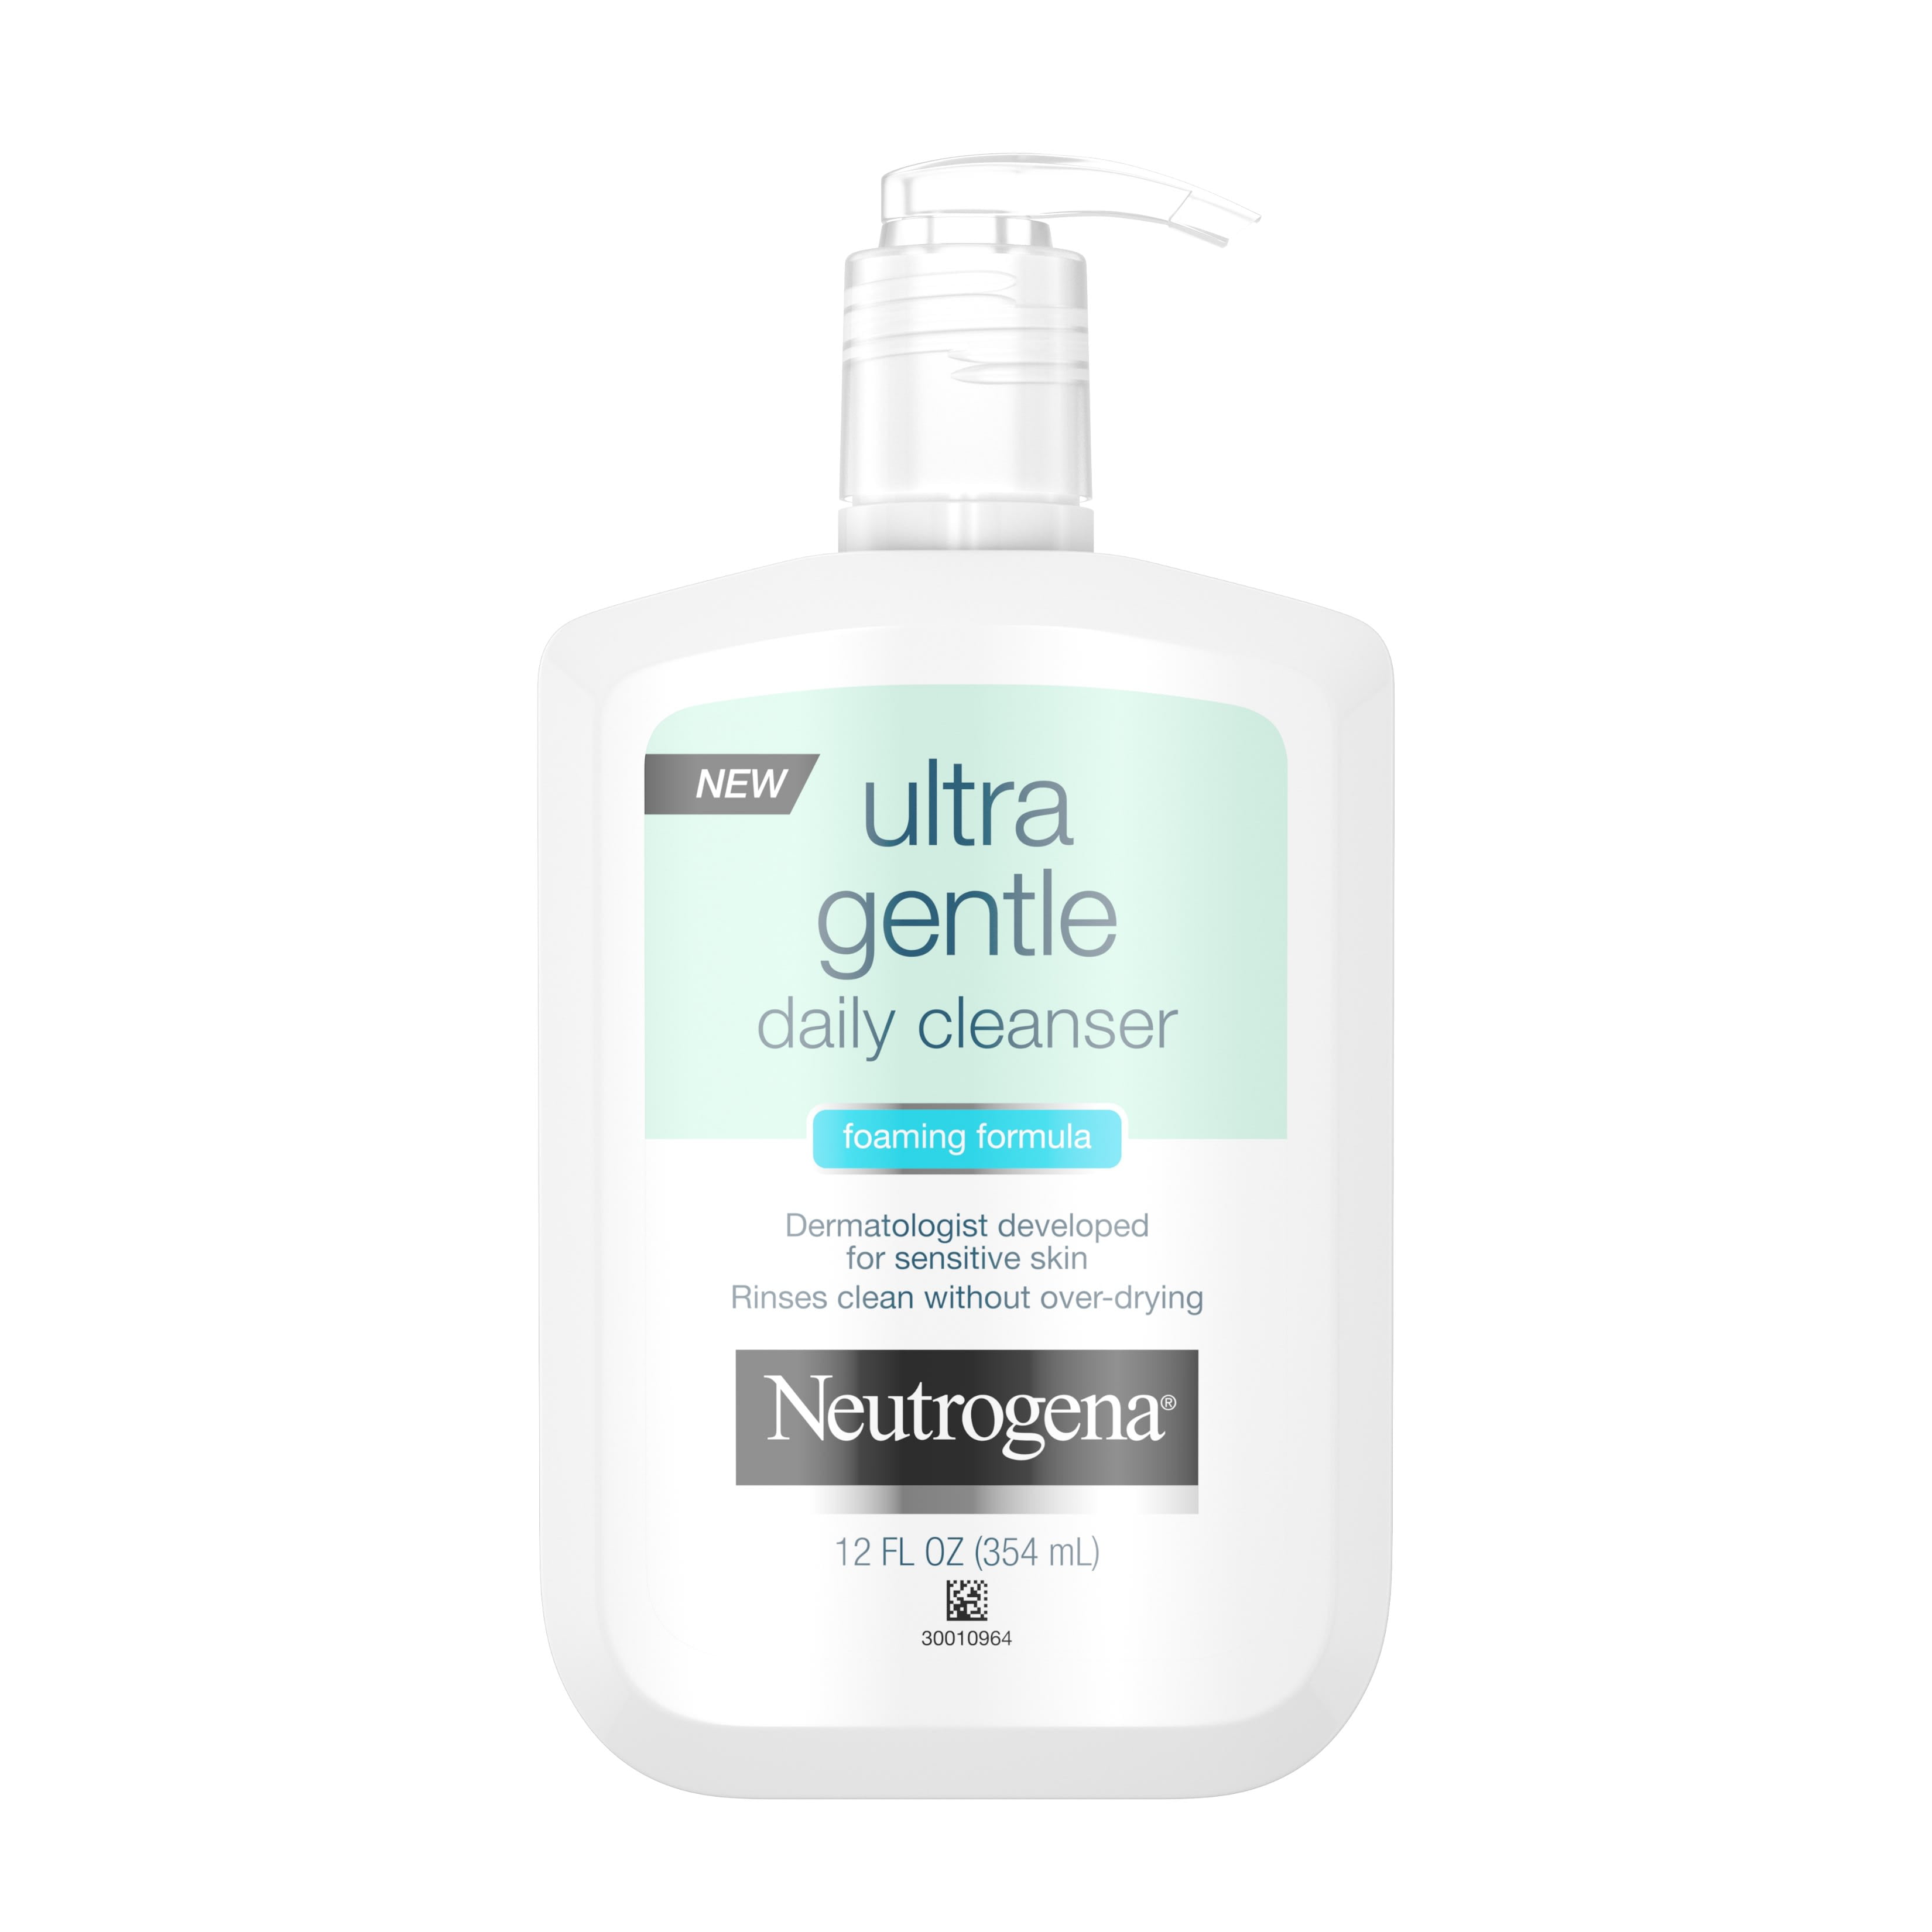 Neutrogena Ultra Gentle Daily Face Wash for Sensitive Skin, Oil-Free, Soap-Free, Hypoallergenic & Non-Comedogenic Foaming Facial Cleanser, 12 fl. oz